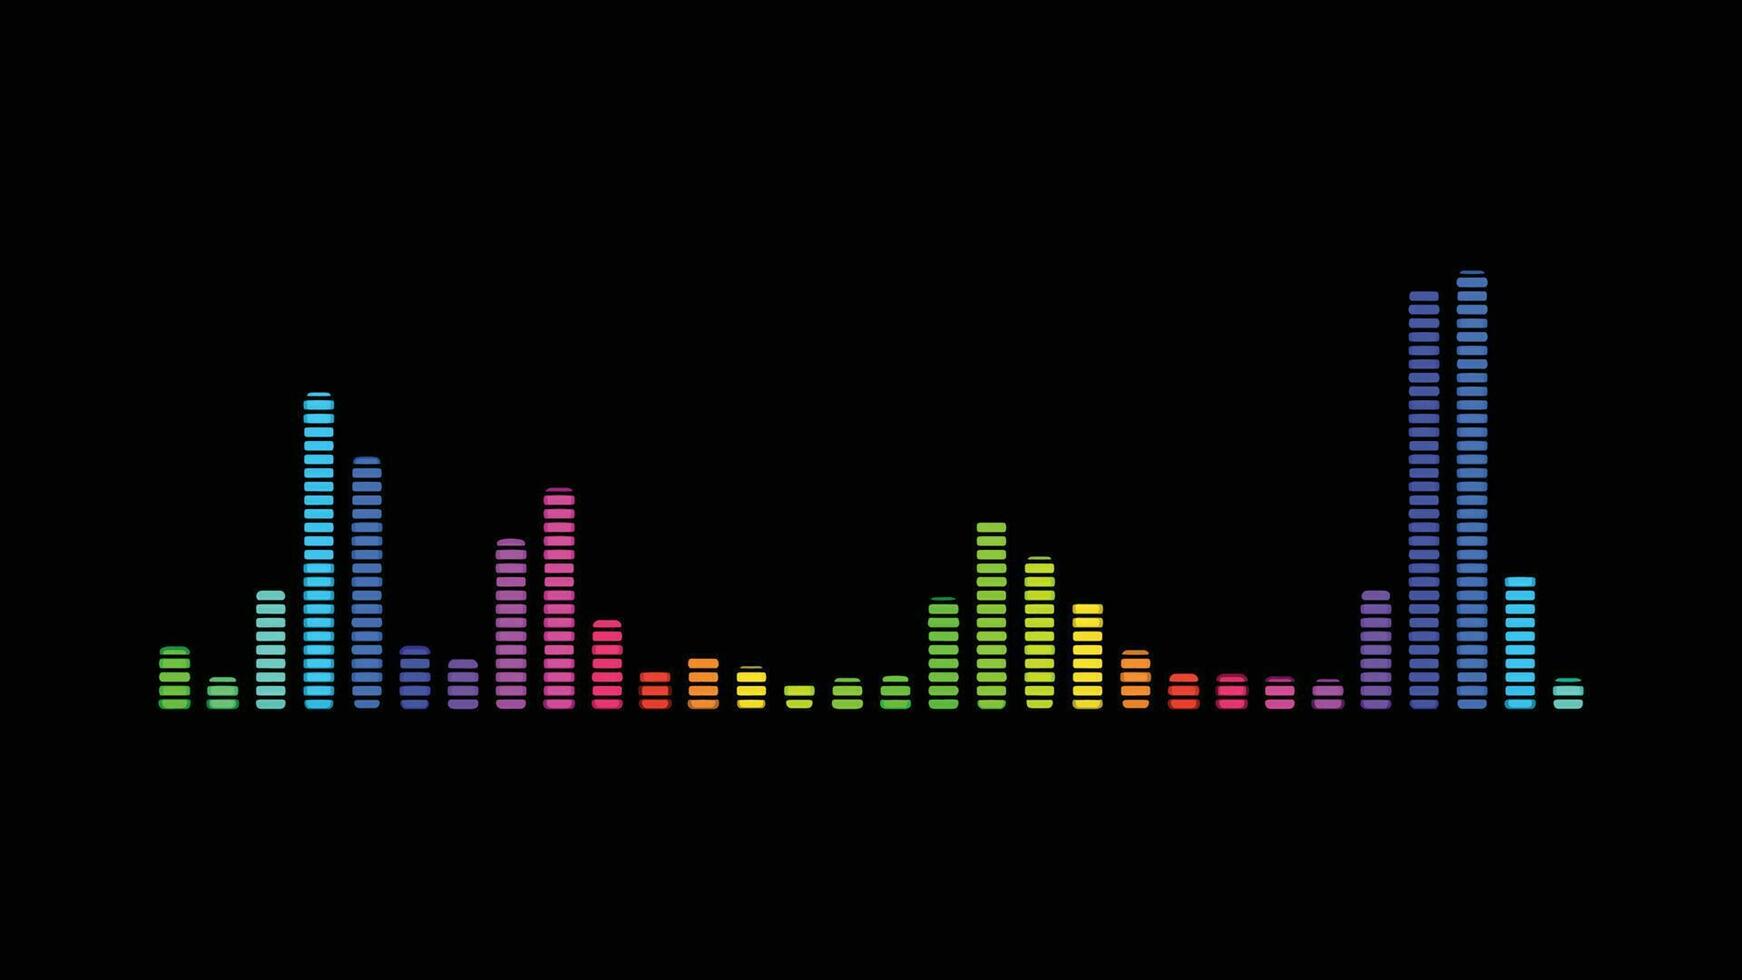 Design of sound music bars, Multicolored digital equalizer with reflection over dark background vector